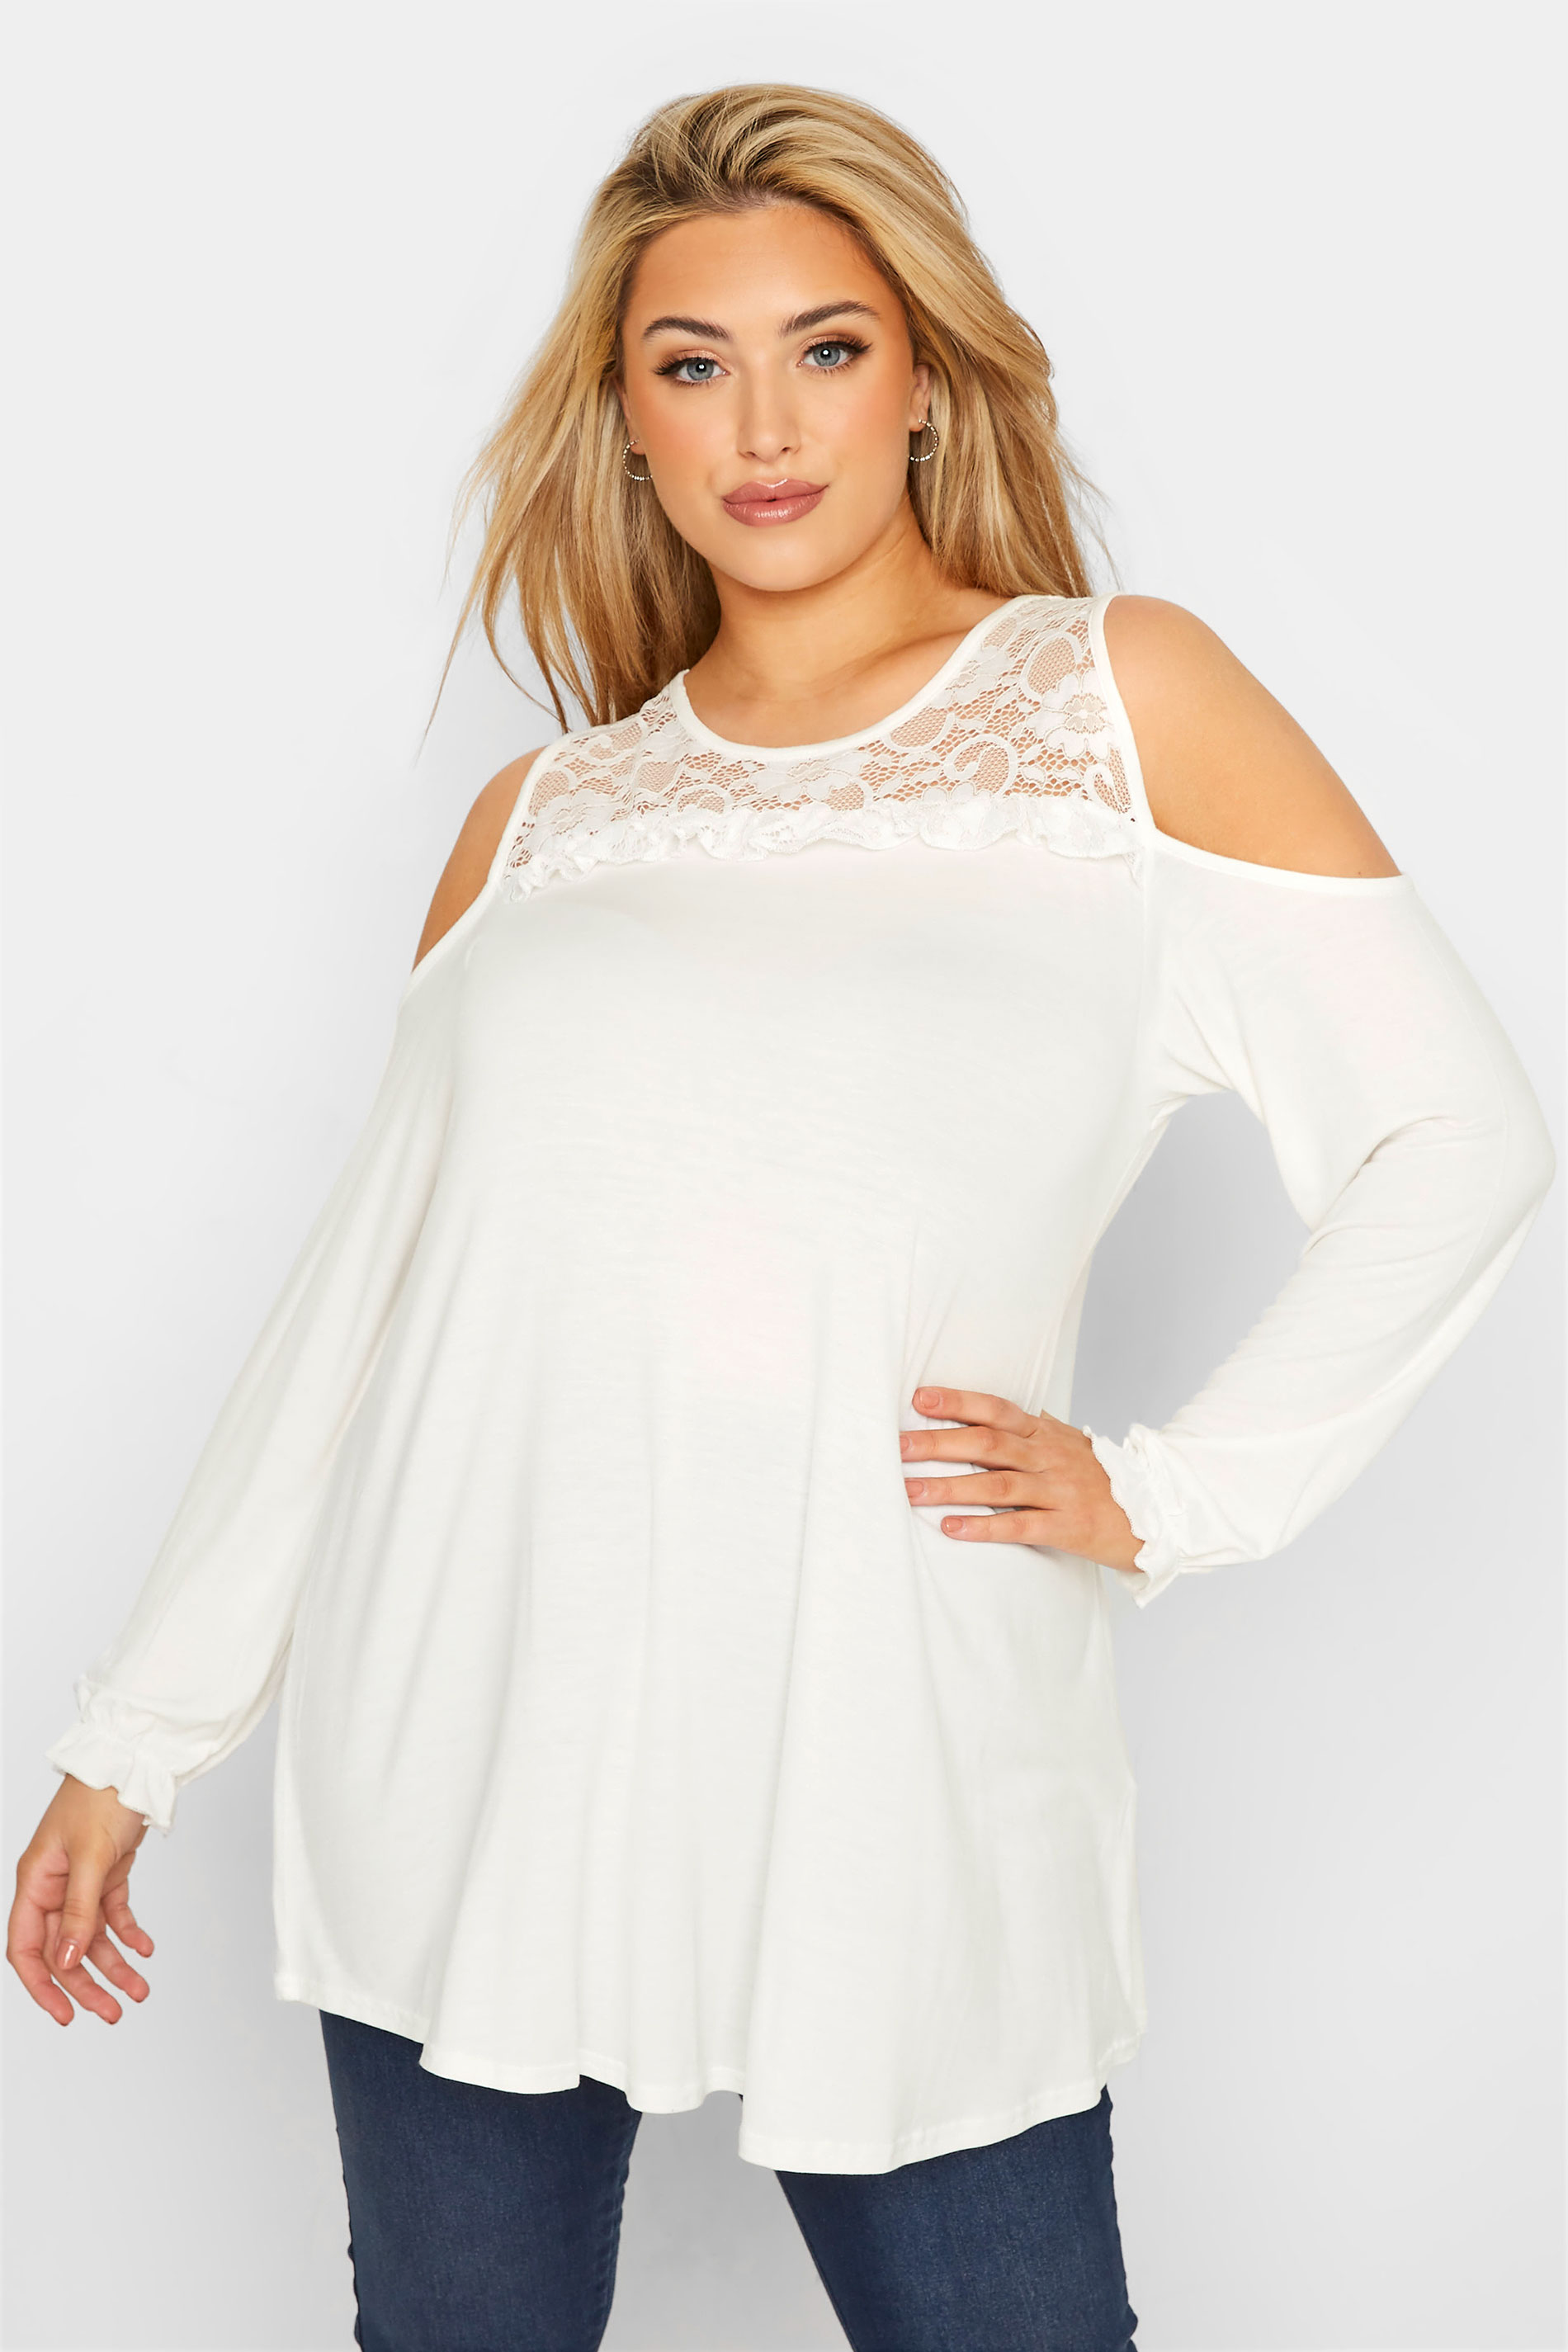 LIMITED COLLECTION Curve White Cold Shoulder Lace Top_A.jpg